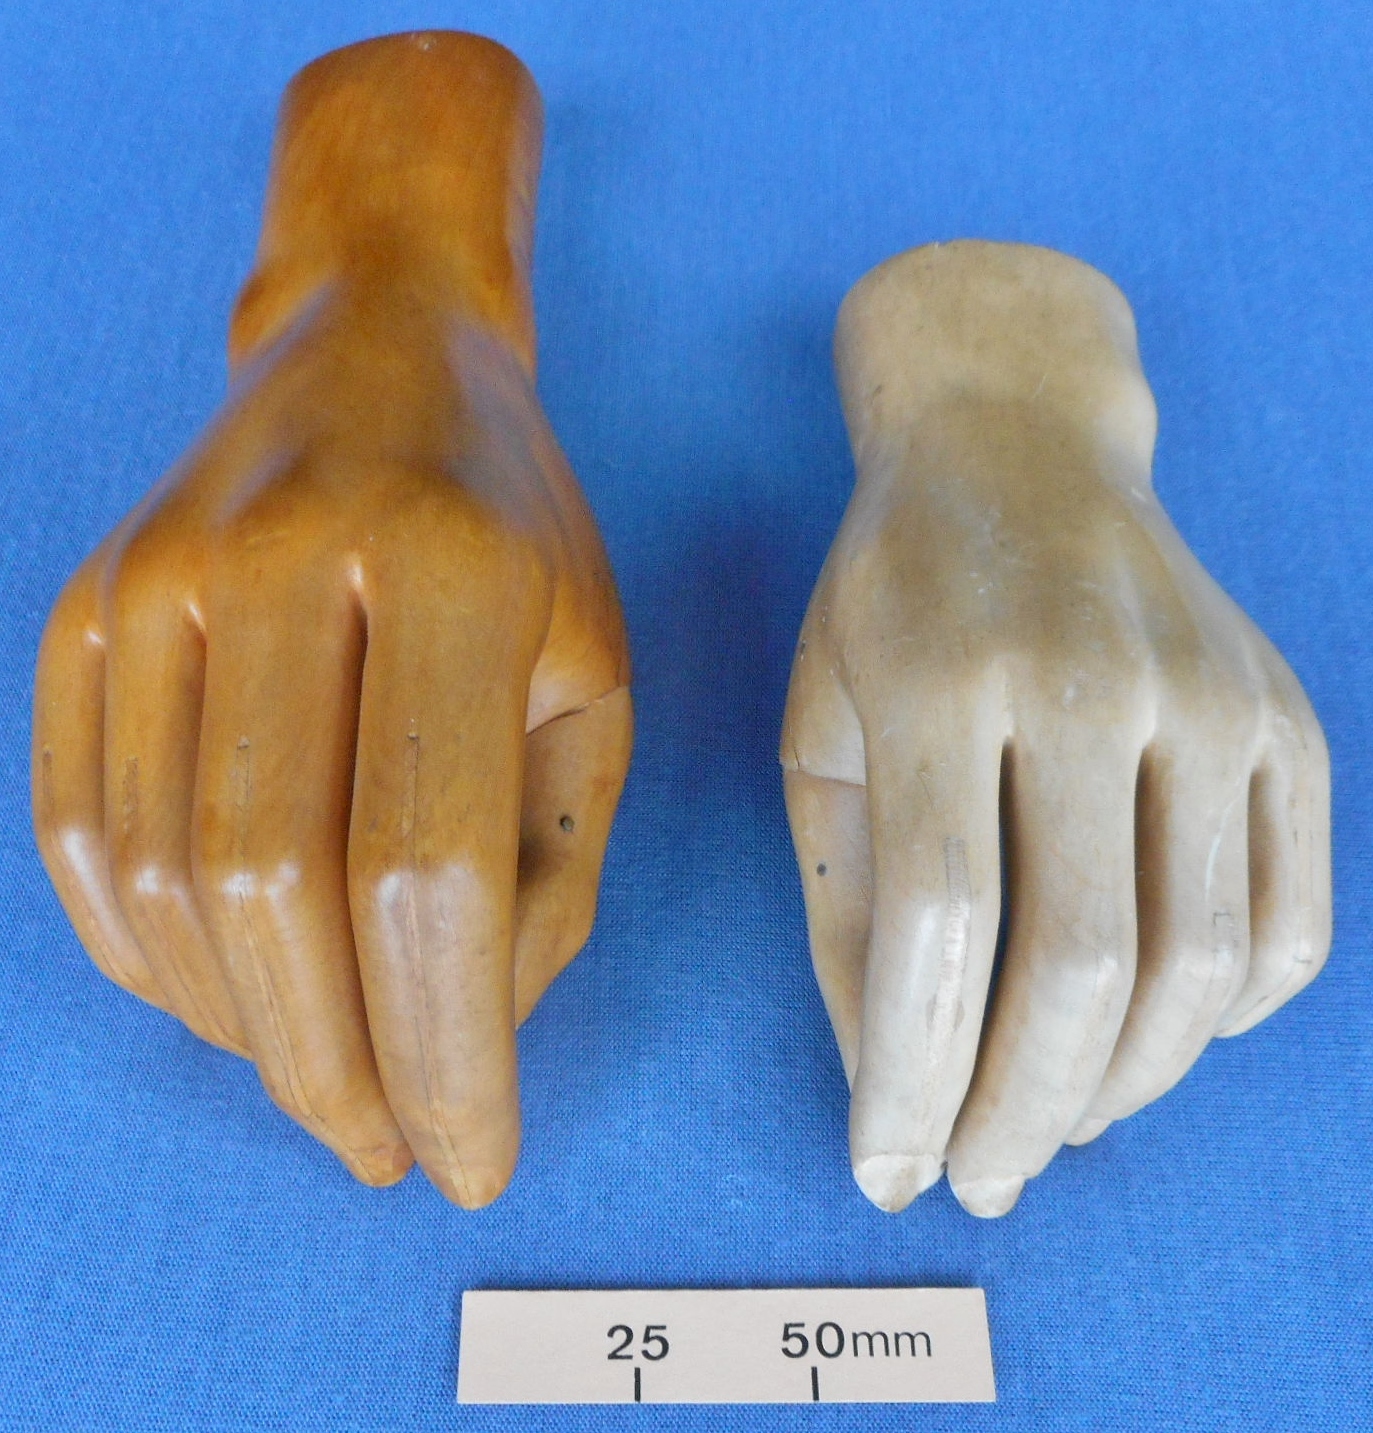 Two wooden life-size hands with articulated thumbs